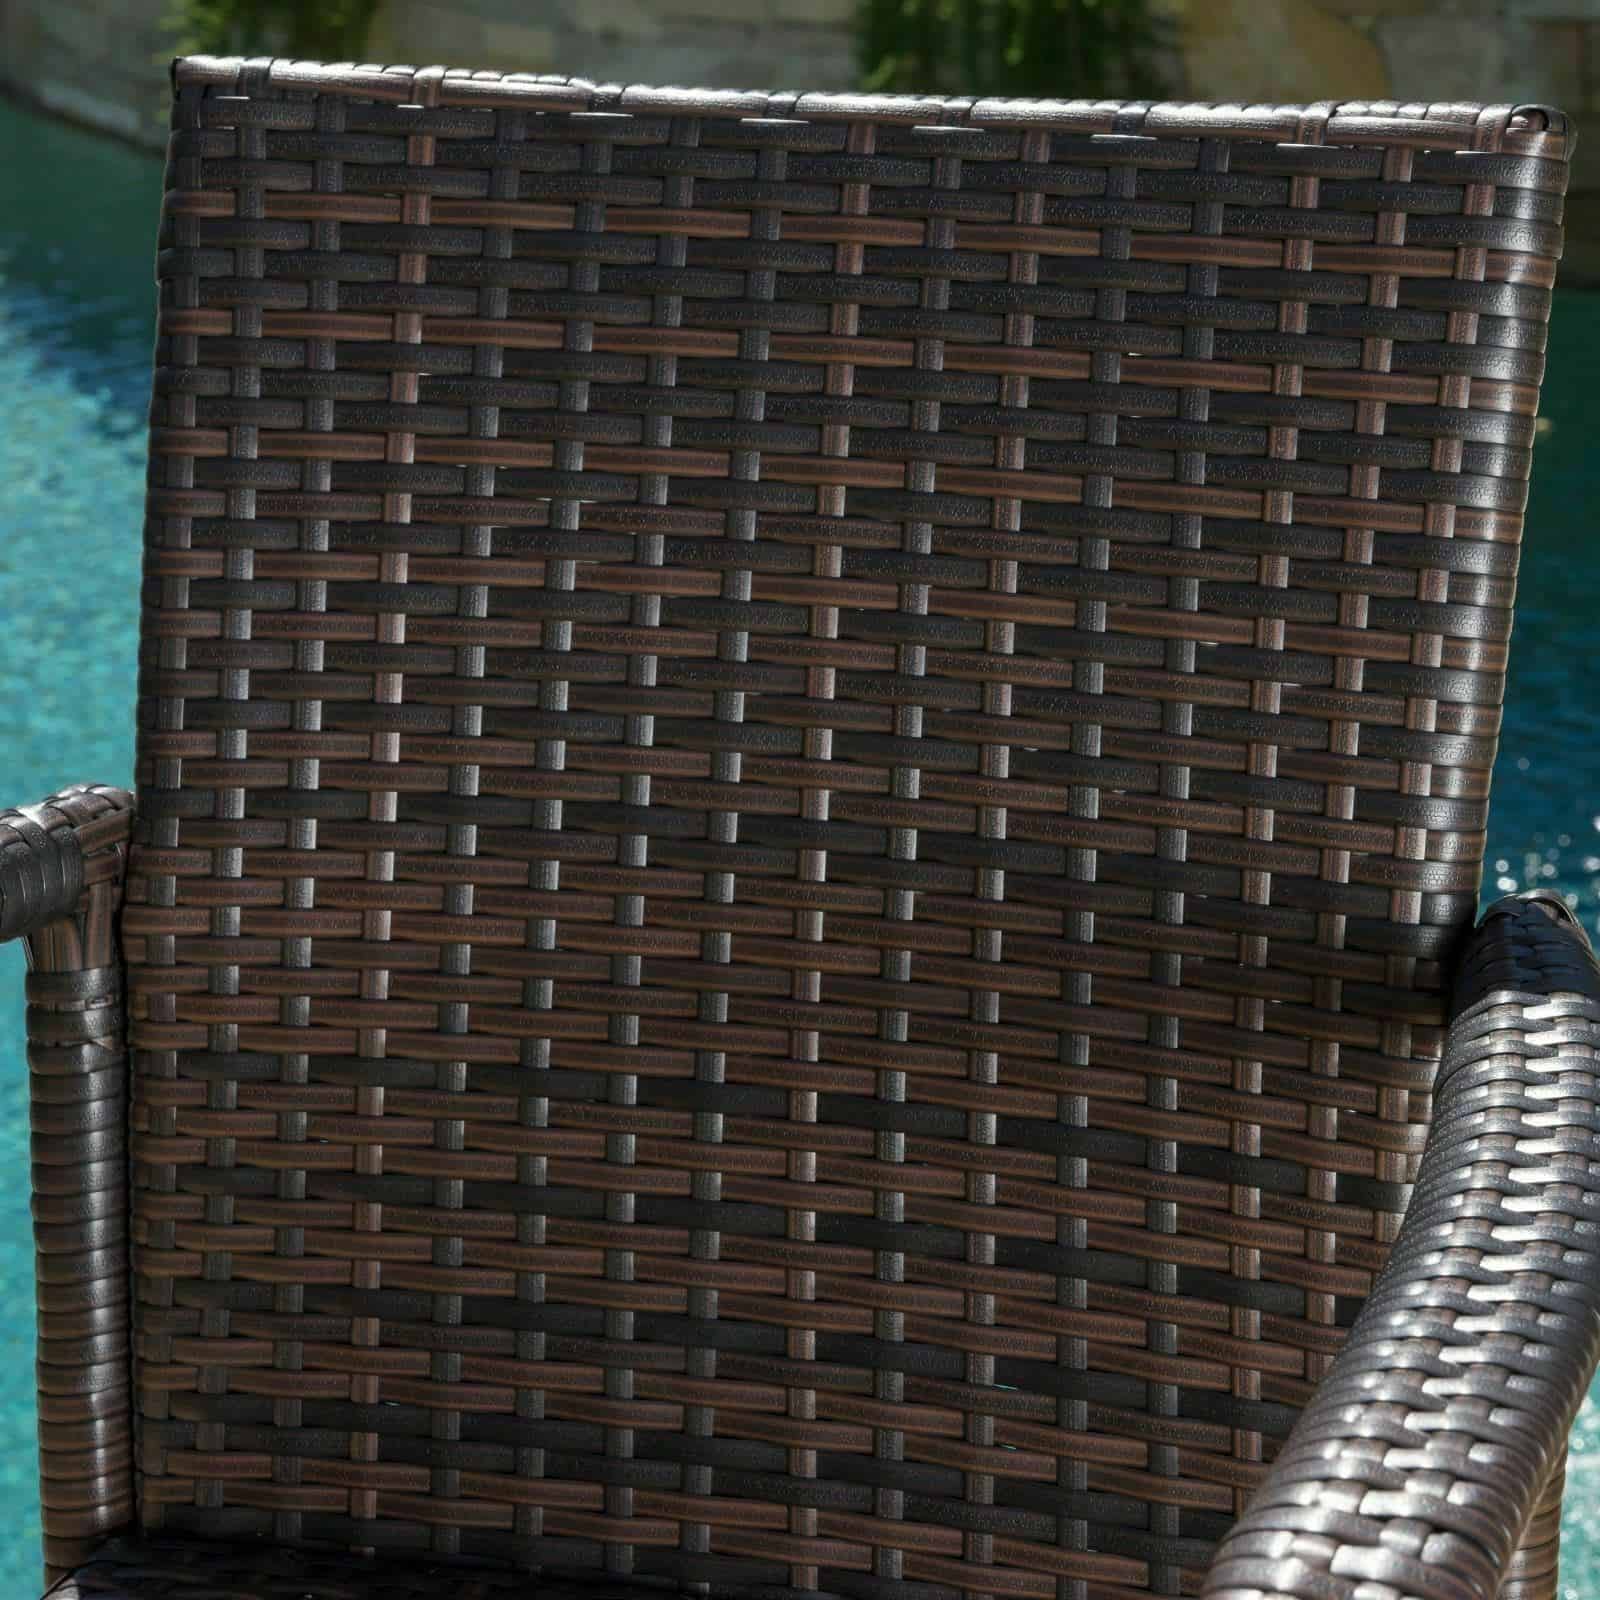 A wicker dining chair in front of a pool.